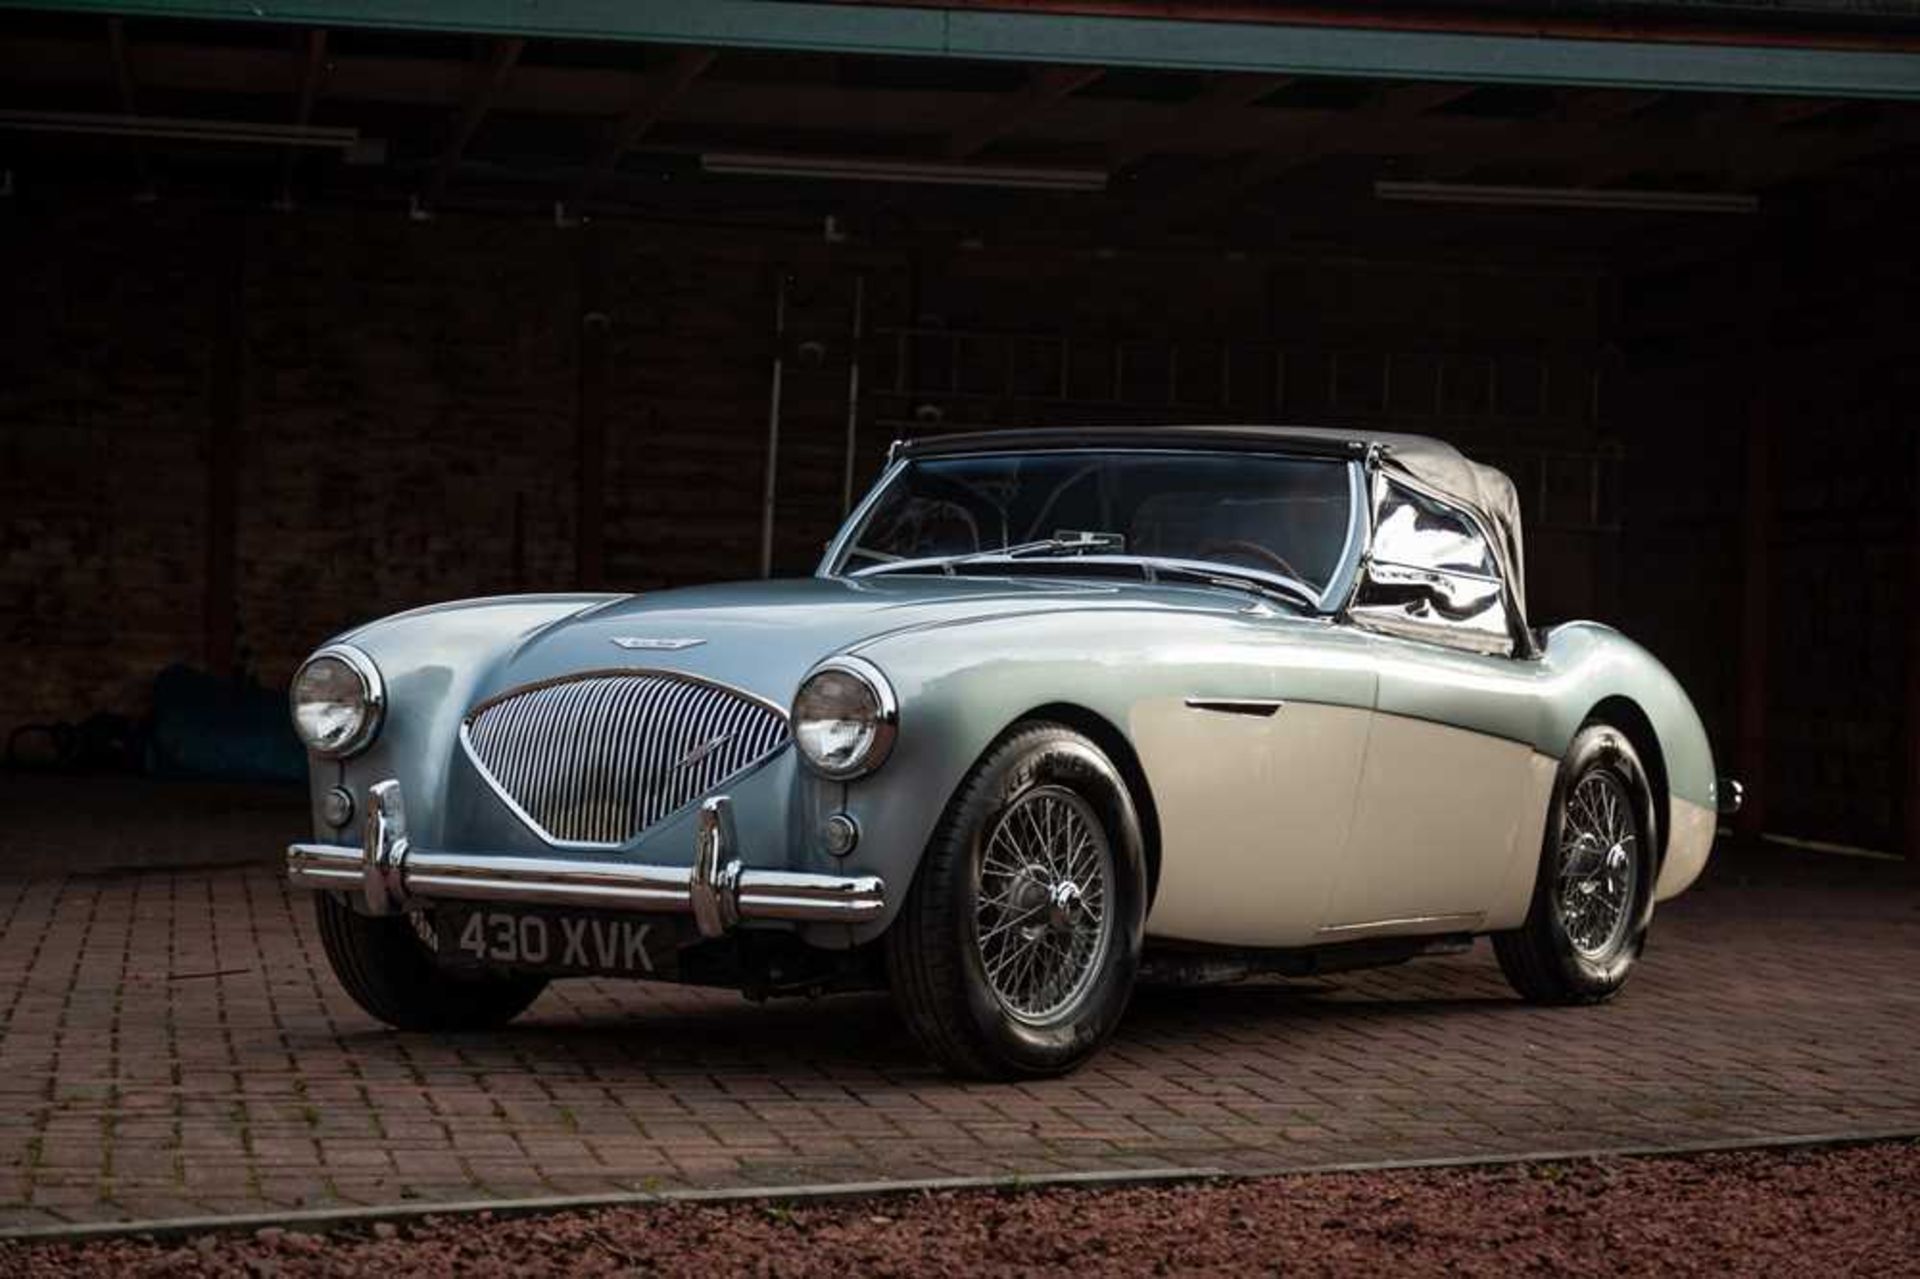 1955 Austin-Healey 100/4 Subtly Upgraded with 5-Speed Transmission and Front Disc Brakes - Image 47 of 54